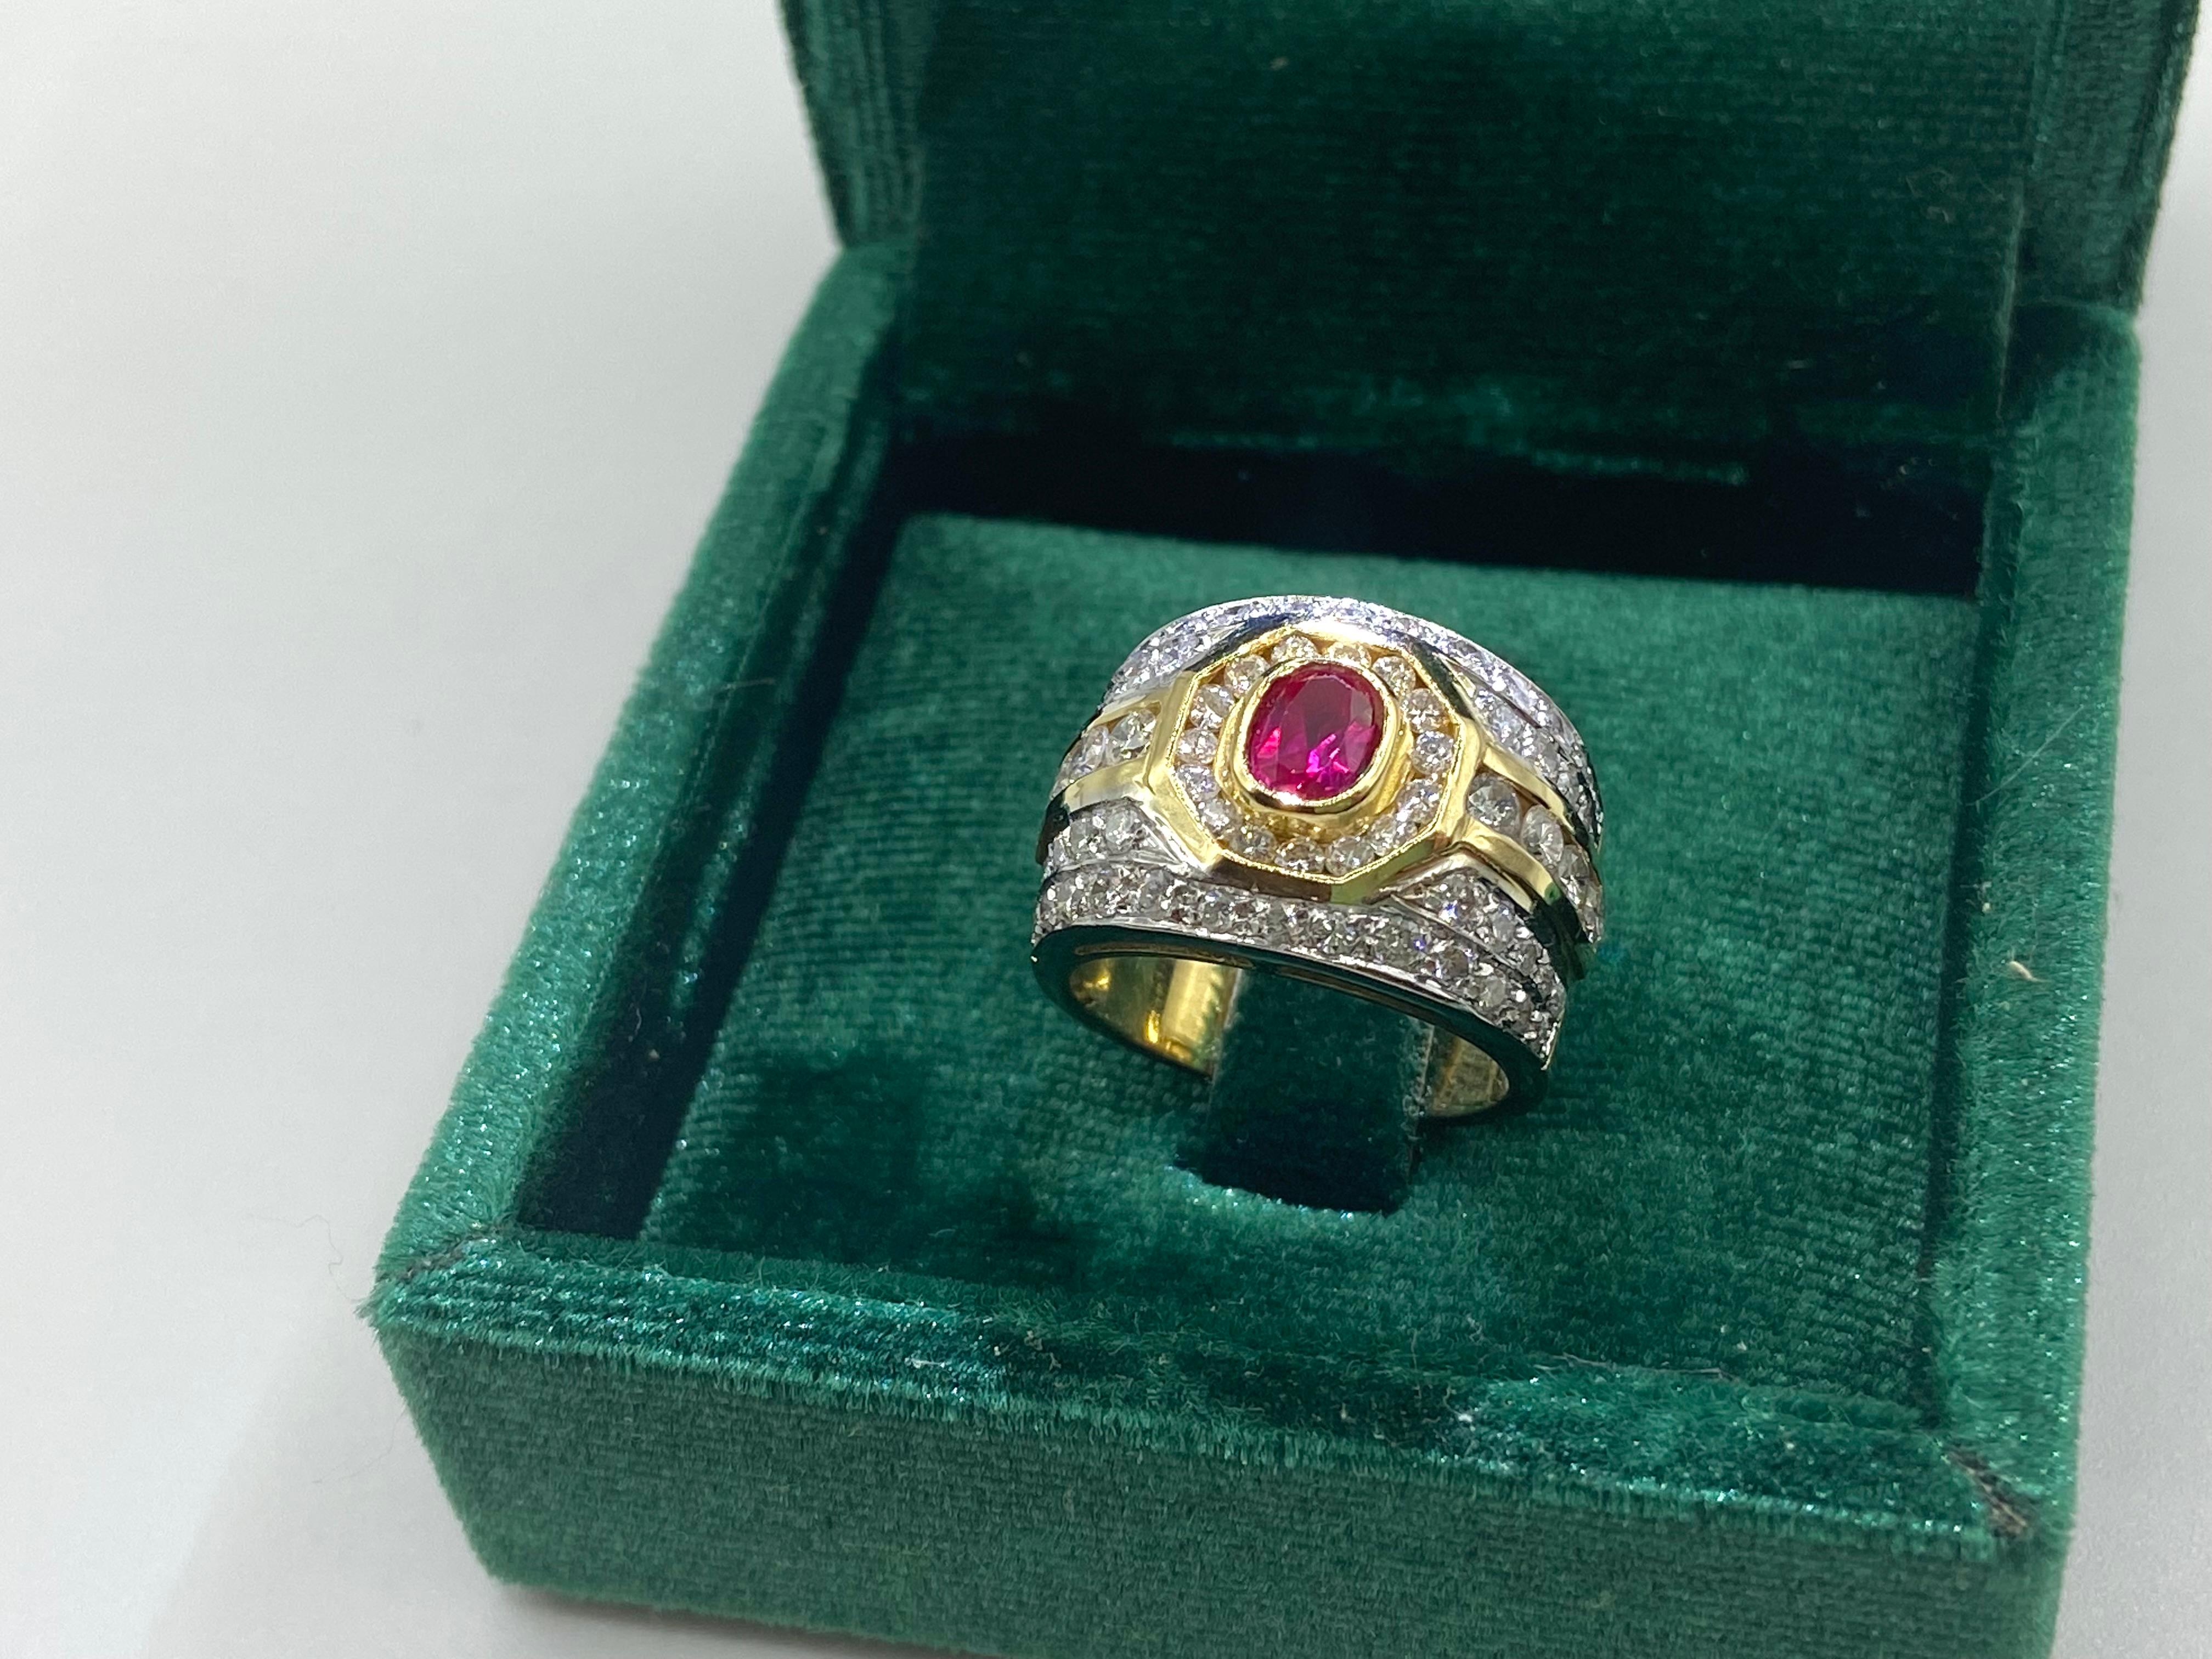 Band ring in 18 kt gold, ruby ​​and brilliant cut diamonds.
Majestic ring in the two colors of gold, white and yellow, 18 kt (750 thousandths, as shown in the stamp in the photograph), weighs 12.8 grams. The upper part is 16 mm wide. Set with a